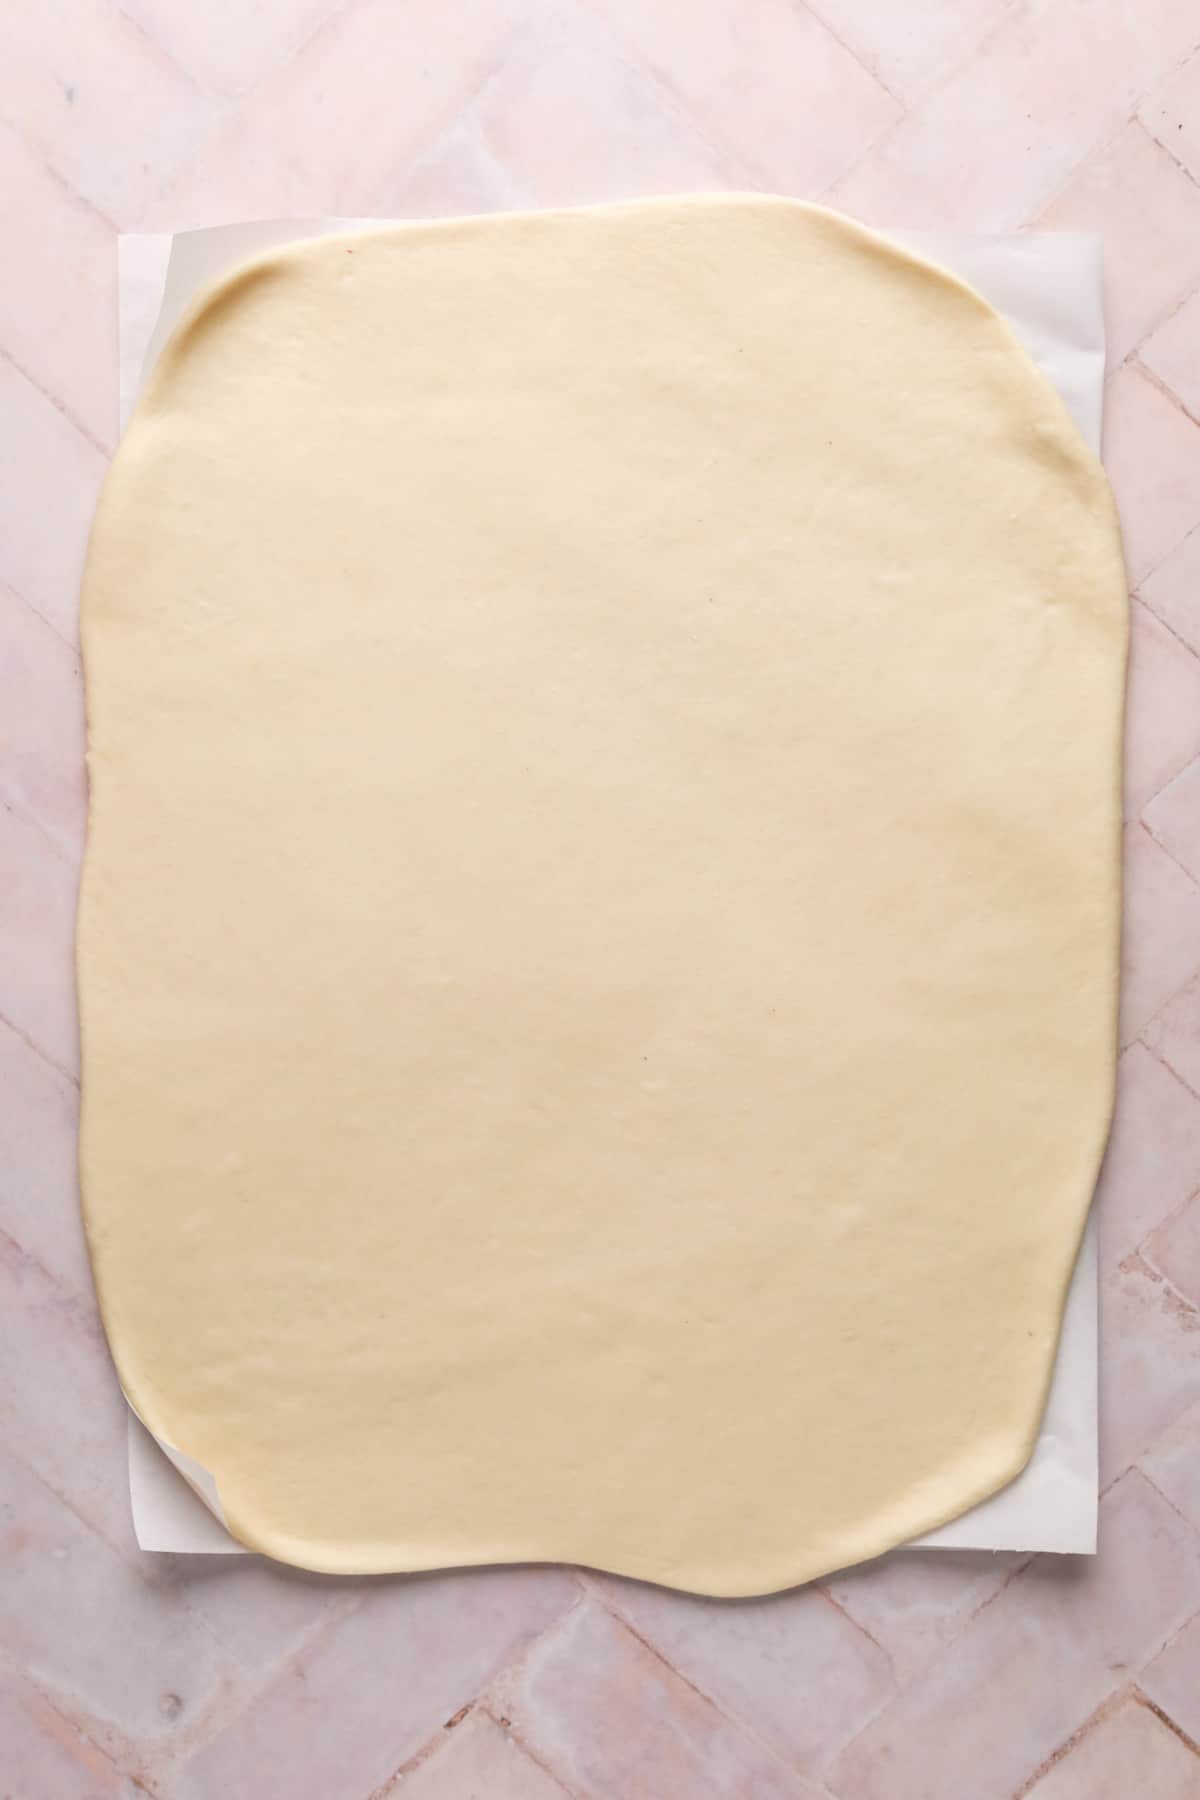 Cinnamon roll dough rolled into a large rectangle on parchment paper set on a flat surface.